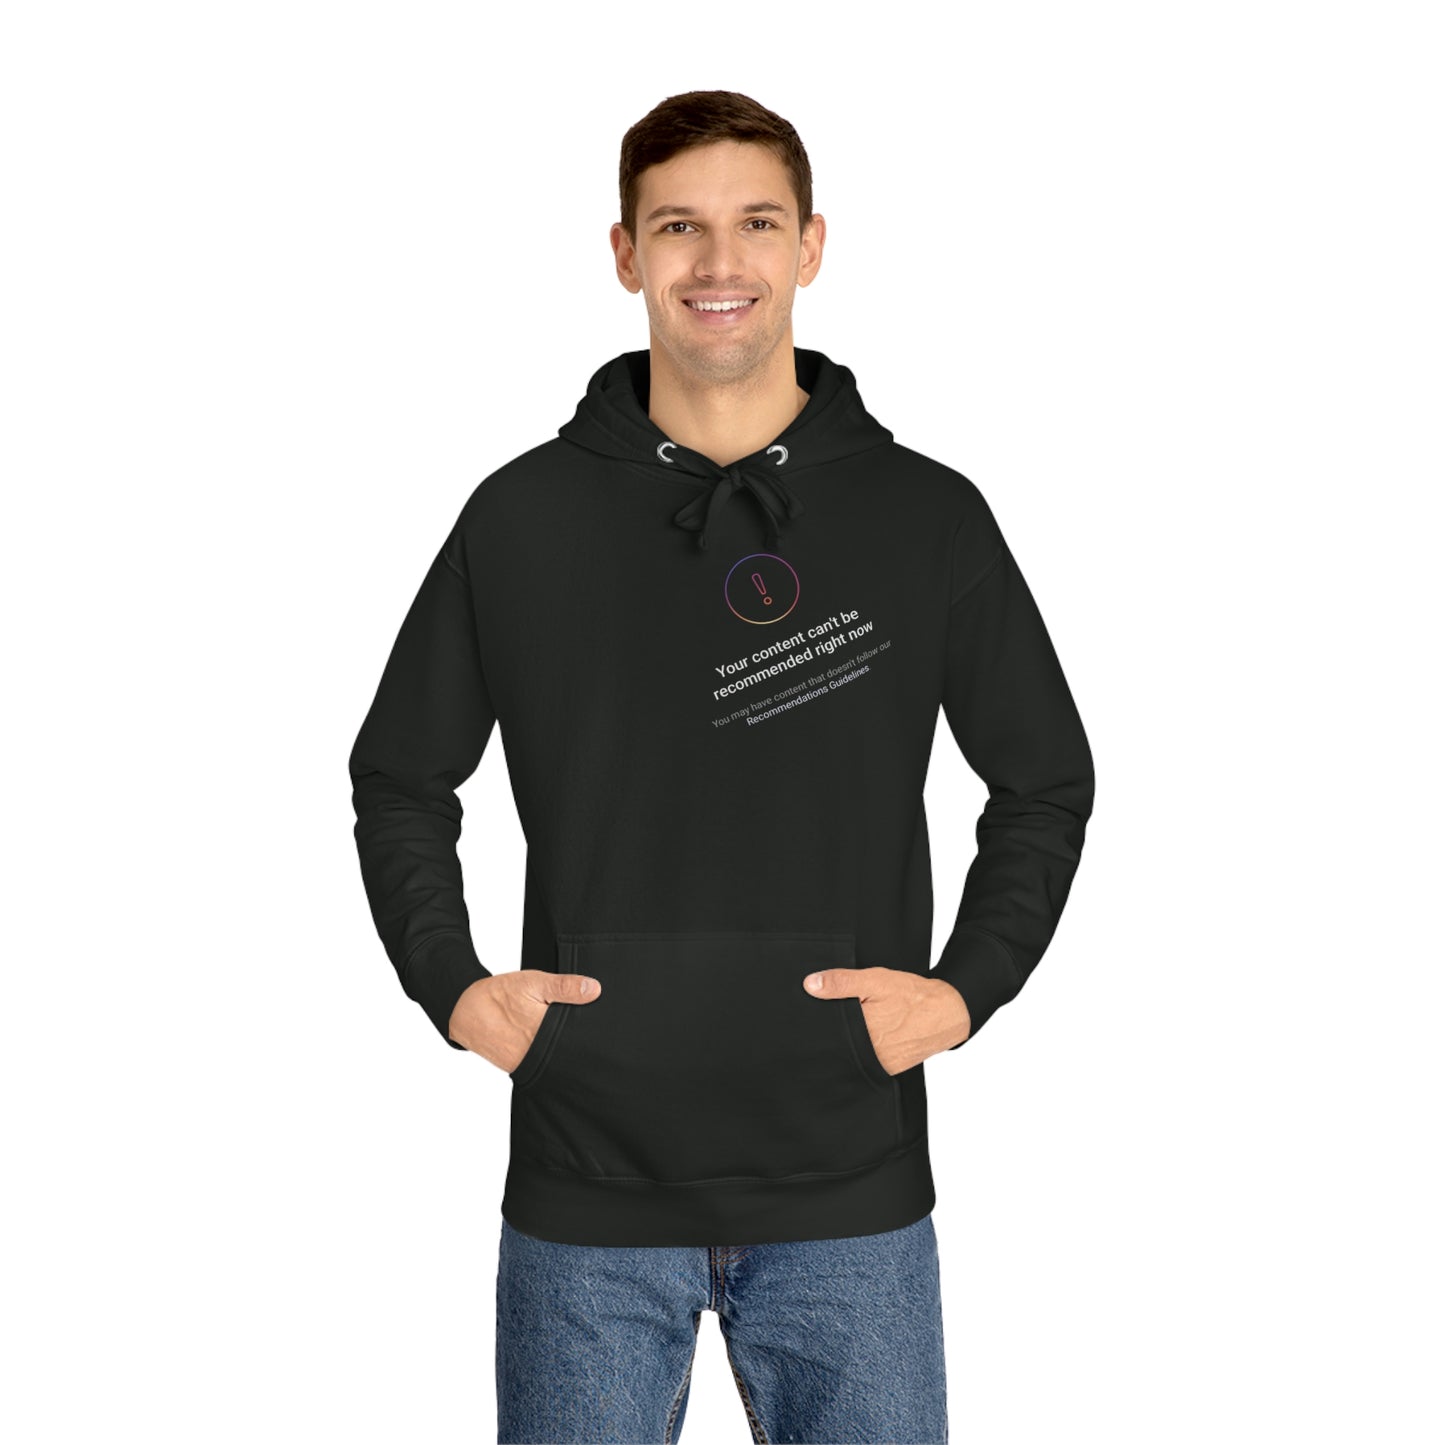 Sharkmouse Content Cant Be Recommended hoodie